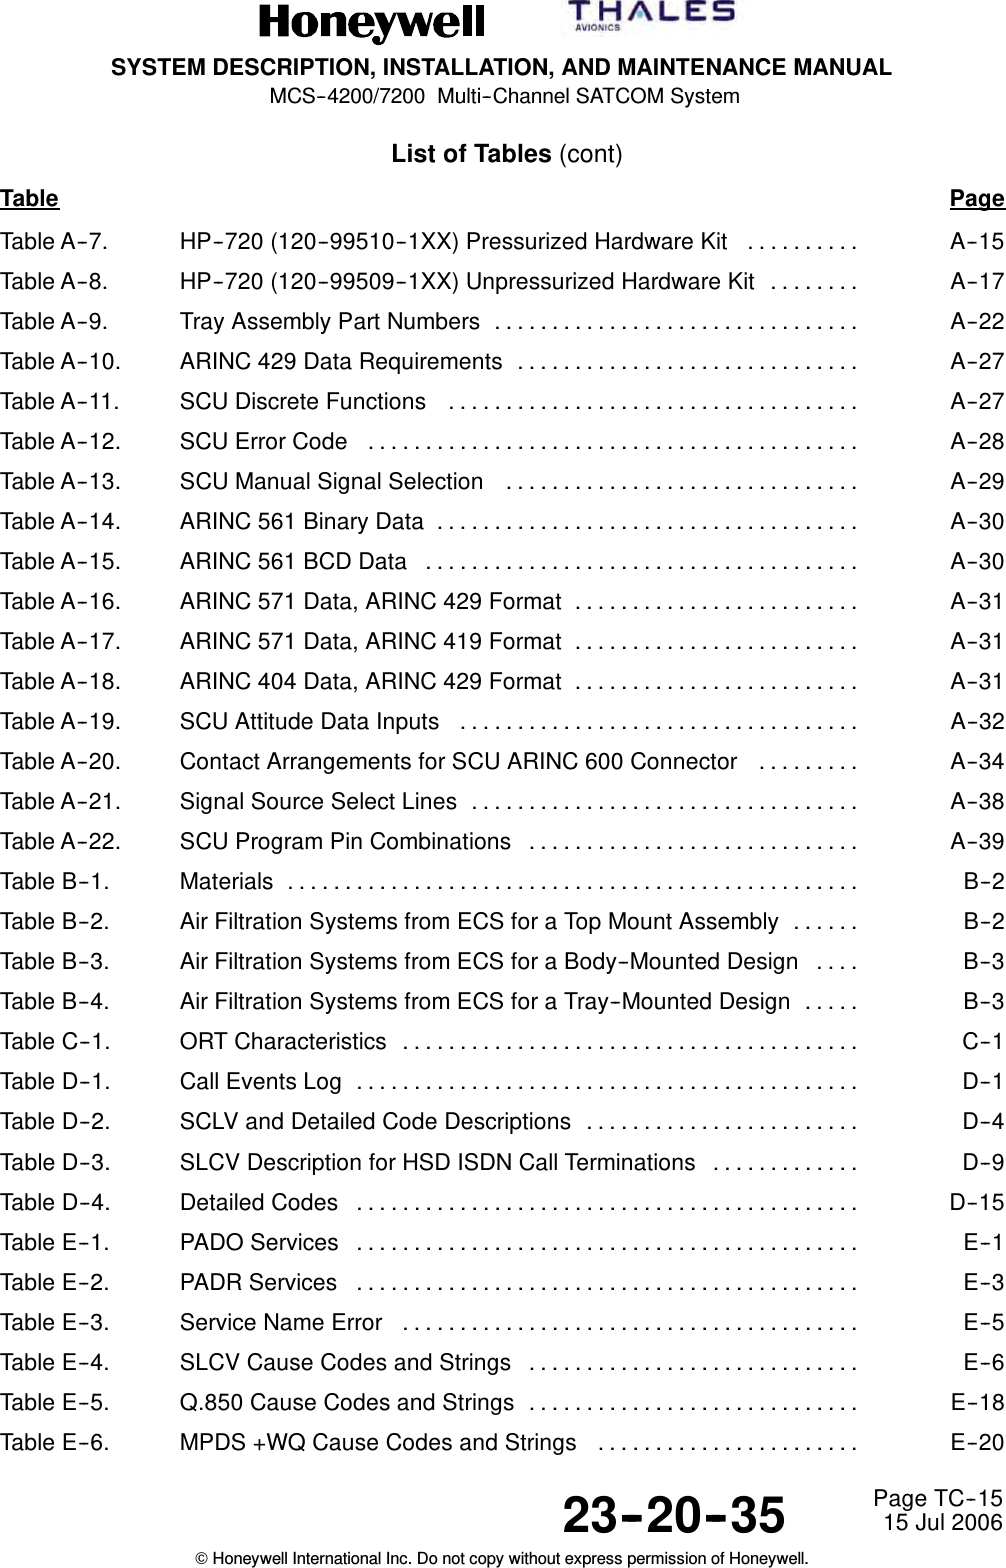 SYSTEM DESCRIPTION, INSTALLATION, AND MAINTENANCE MANUALMCS--4200/7200 Multi--Channel SATCOM System23--20--35 15 Jul 2006Honeywell International Inc. Do not copy without express permission of Honeywell.Page TC--15List of Tables (cont)Table PageTable A--7. HP--720 (120--99510--1XX) Pressurized Hardware Kit A--15..........Table A--8. HP--720 (120--99509--1XX) Unpressurized Hardware Kit A--17........Table A--9. Tray Assembly Part Numbers A--22................................Table A--10. ARINC 429 Data Requirements A--27..............................Table A--11. SCU Discrete Functions A--27....................................Table A--12. SCU Error Code A--28...........................................Table A--13. SCU Manual Signal Selection A--29...............................Table A--14. ARINC 561 Binary Data A--30.....................................Table A--15. ARINC 561 BCD Data A--30......................................Table A--16. ARINC 571 Data, ARINC 429 Format A--31.........................Table A--17. ARINC 571 Data, ARINC 419 Format A--31.........................Table A--18. ARINC 404 Data, ARINC 429 Format A--31.........................Table A--19. SCU Attitude Data Inputs A--32...................................Table A--20. Contact Arrangements for SCU ARINC 600 Connector A--34.........Table A--21. Signal Source Select Lines A--38..................................Table A--22. SCU Program Pin Combinations A--39.............................Table B--1. Materials B--2..................................................Table B--2. Air Filtration Systems from ECS for a Top Mount Assembly B--2......Table B--3. Air Filtration Systems from ECS for a Body--Mounted Design B--3....Table B--4. Air Filtration Systems from ECS for a Tray--Mounted Design B--3.....Table C--1. ORT Characteristics C--1........................................Table D--1. Call Events Log D--1............................................Table D--2. SCLV and Detailed Code Descriptions D--4........................Table D--3. SLCV Description for HSD ISDN Call Terminations D--9.............Table D--4. Detailed Codes D--15............................................Table E--1. PADO Services E--1............................................Table E--2. PADR Services E--3............................................Table E--3. Service Name Error E--5........................................Table E--4. SLCV Cause Codes and Strings E--6.............................Table E--5. Q.850 Cause Codes and Strings E--18.............................Table E--6. MPDS +WQ Cause Codes and Strings E--20.......................